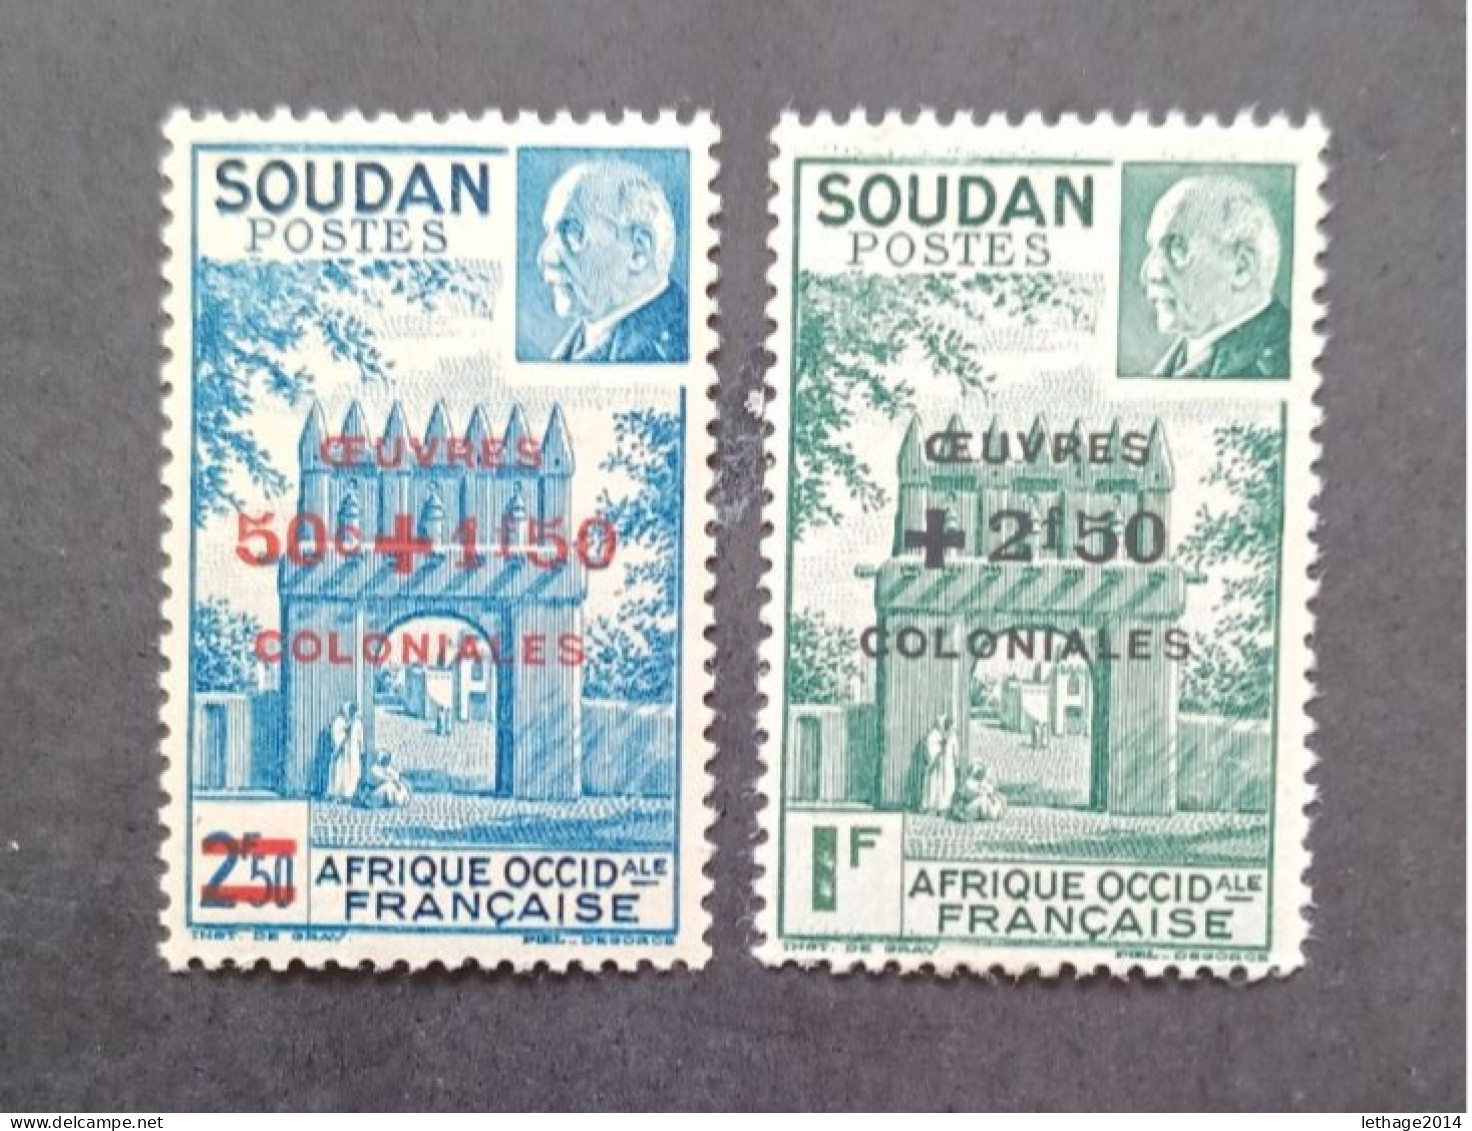 FRANCE COLONIE SOUDAN 1944 MARECHAL PETAIN SURCHARGES OEUVRES COLONIALES CAT YVERT N. 133/134 MNH - 1944 Maréchal Pétain, Surchargés – Œuvres Coloniales